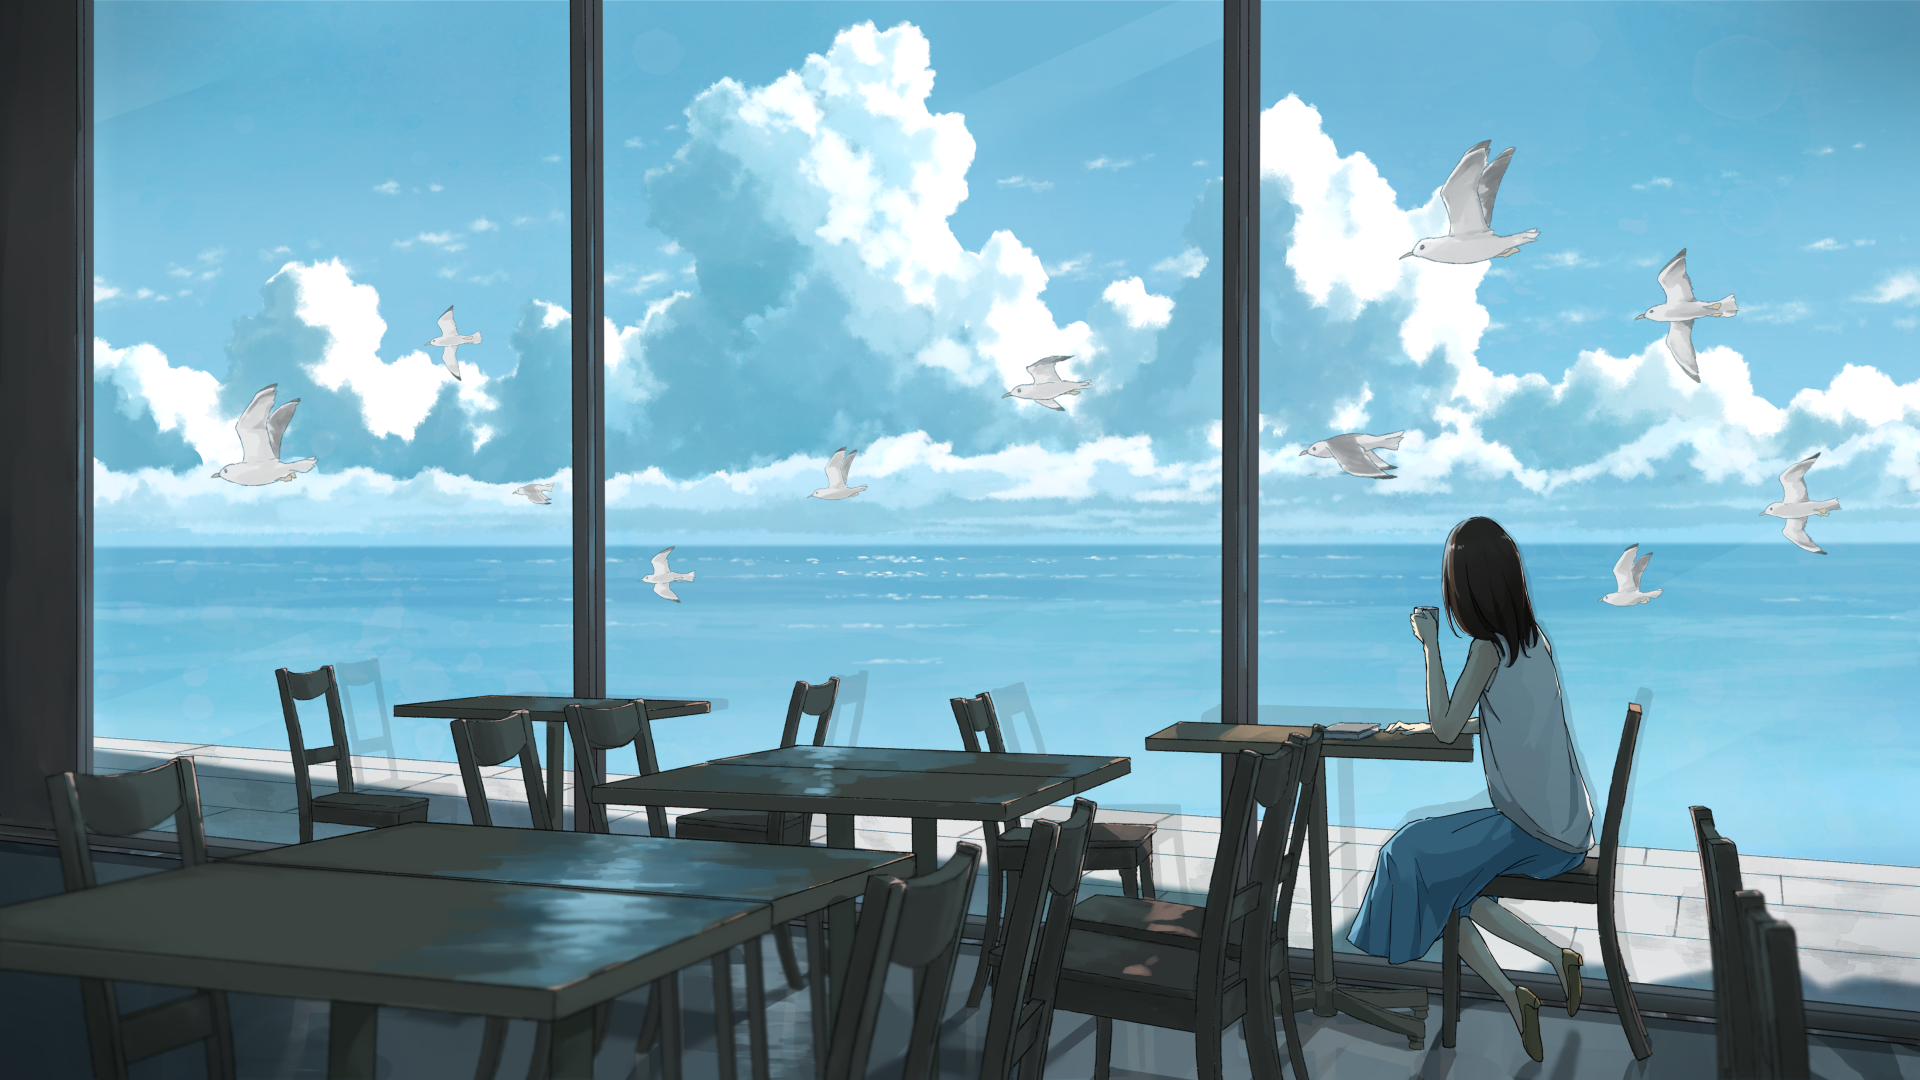 Sky Seagulls Chair Clouds Table 1920x1080